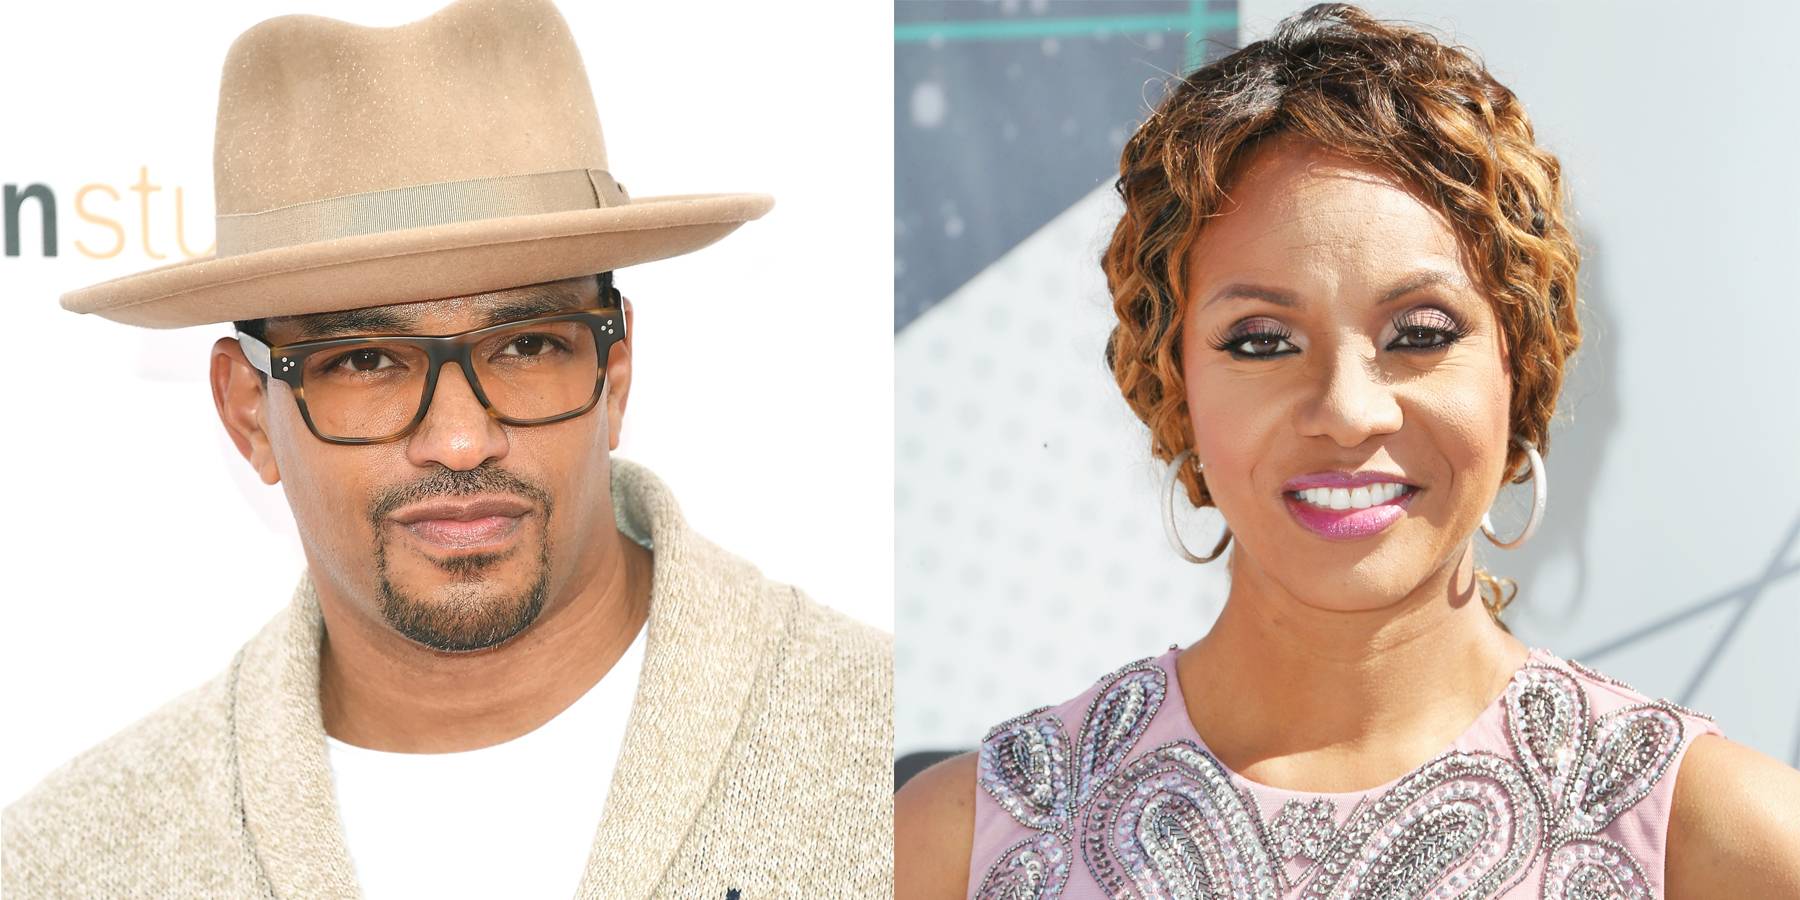 Get to Know: Laz Alonso and MC Lyte  - This Sunday at 10A/9C, catch MC Lyte and Laz Alonso sharing their stories and testimony.(Photos from left: Gary Gershoff/Getty Images, Frederick M. Brown/Getty Images)